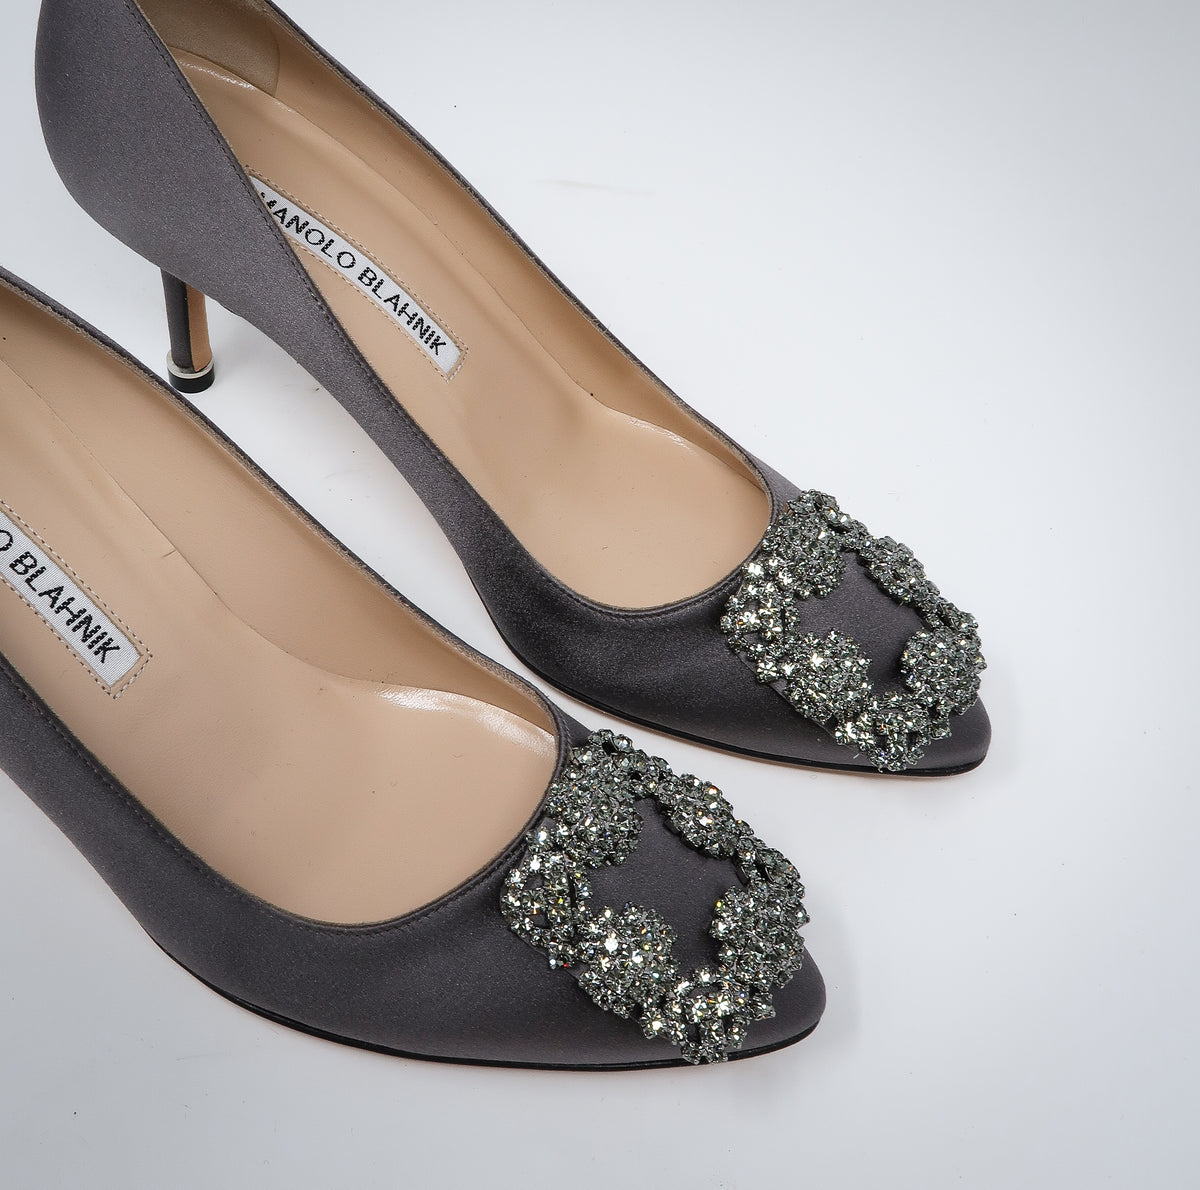 grey satin heels with dark silver buckle ornament (front view)